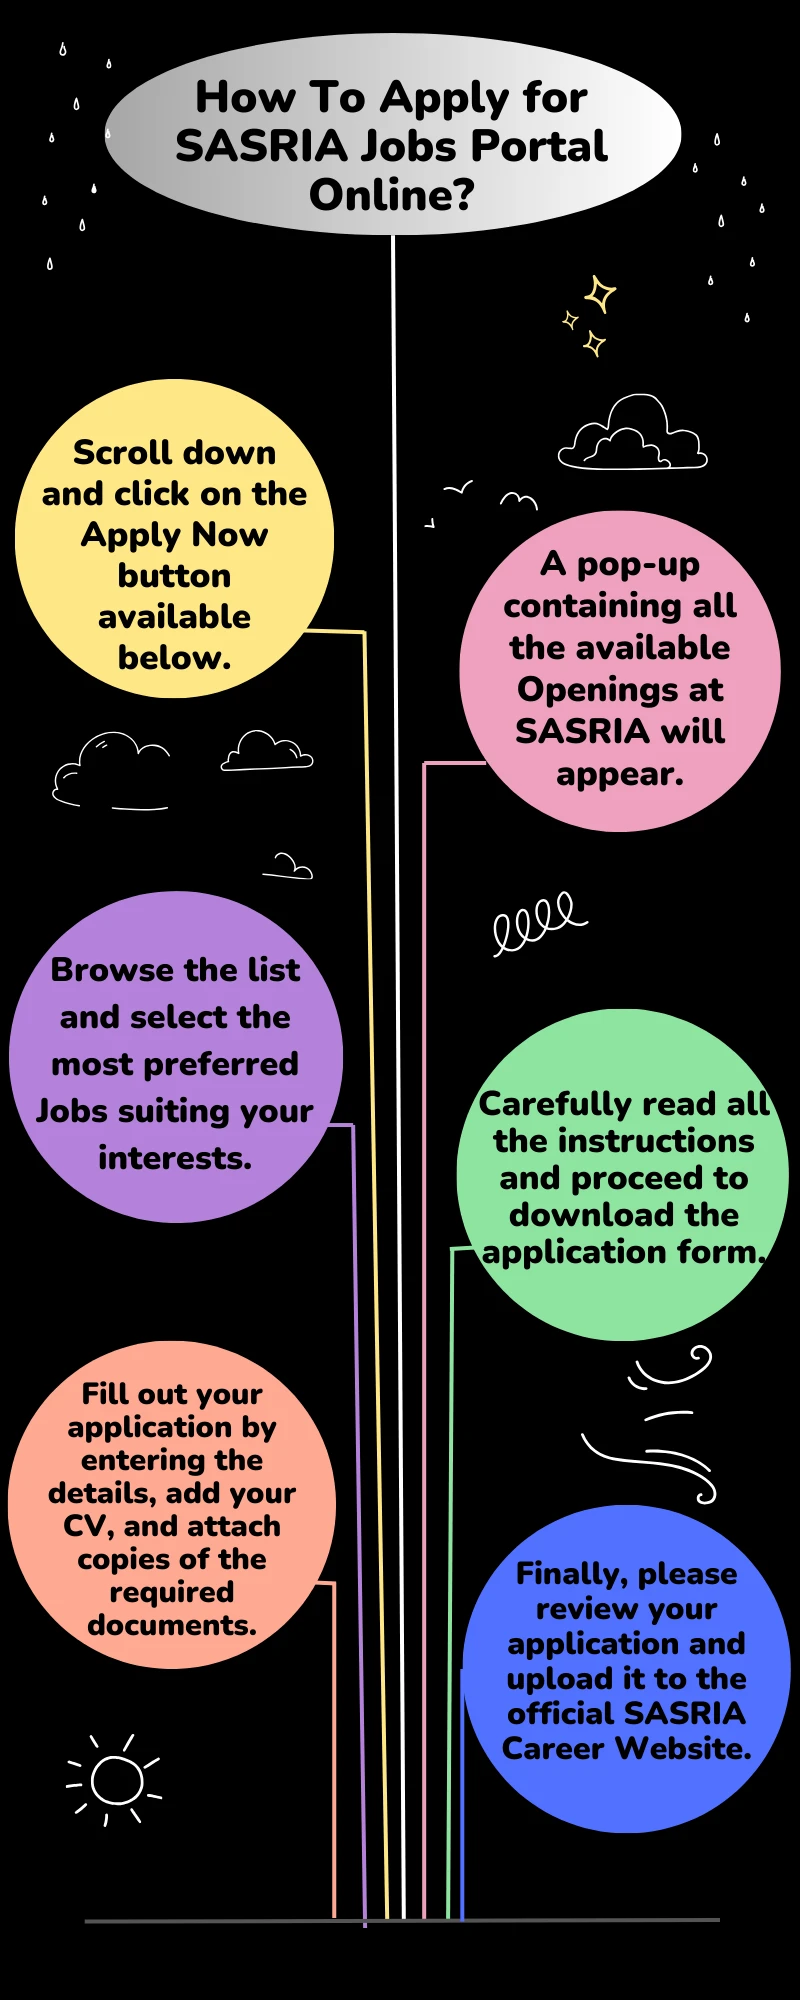 How To Apply for SASRIA Jobs Portal Online?